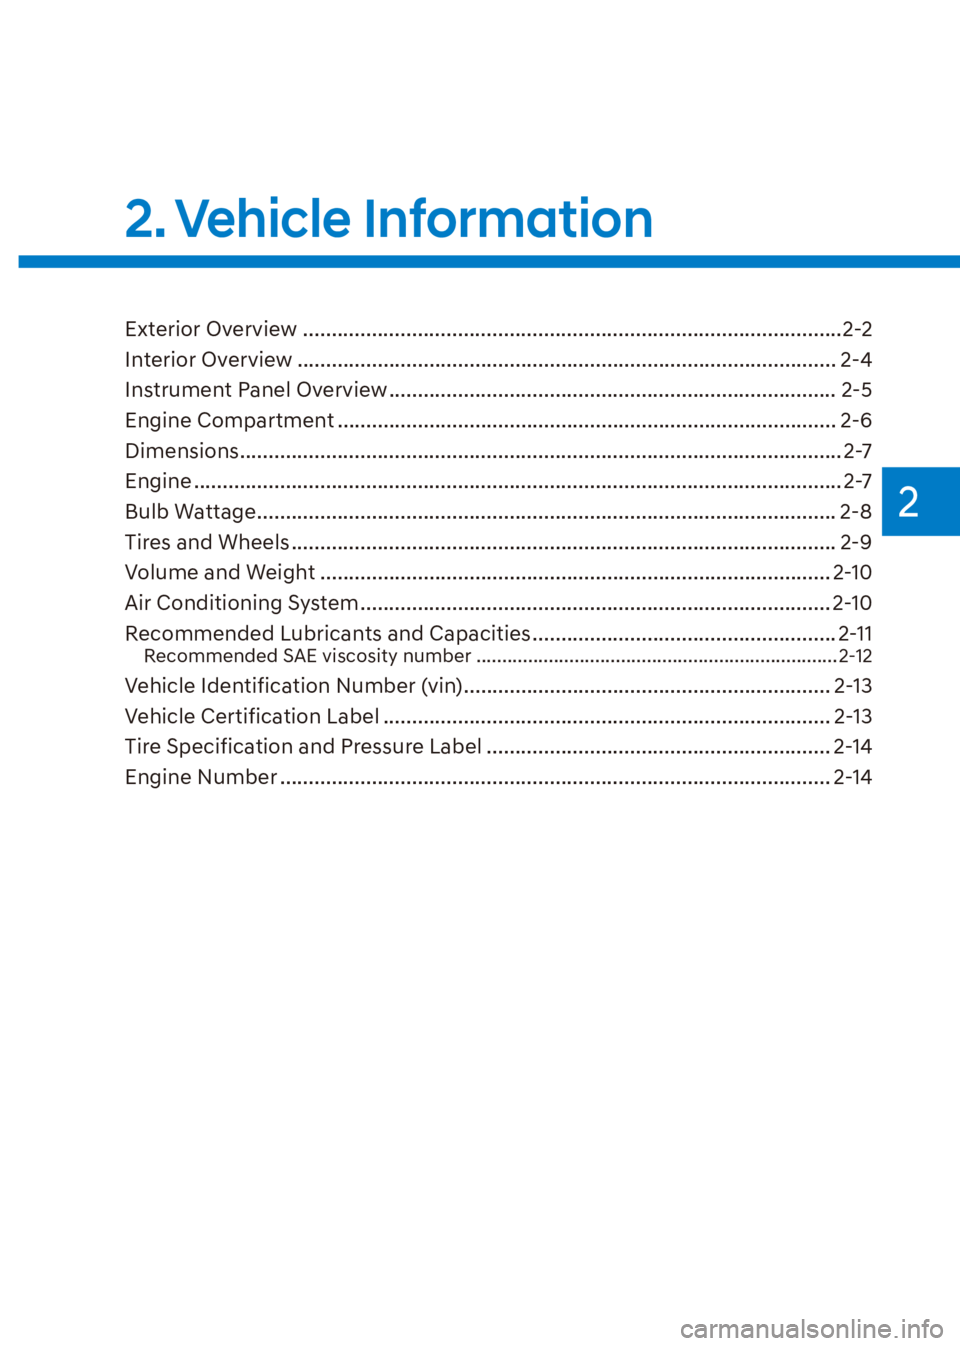 HYUNDAI VENUE 2022  Owners Manual 2
2. Vehicle  Information
Exterior Overview ..............................................................................................2-2
Interior Overview ........................................